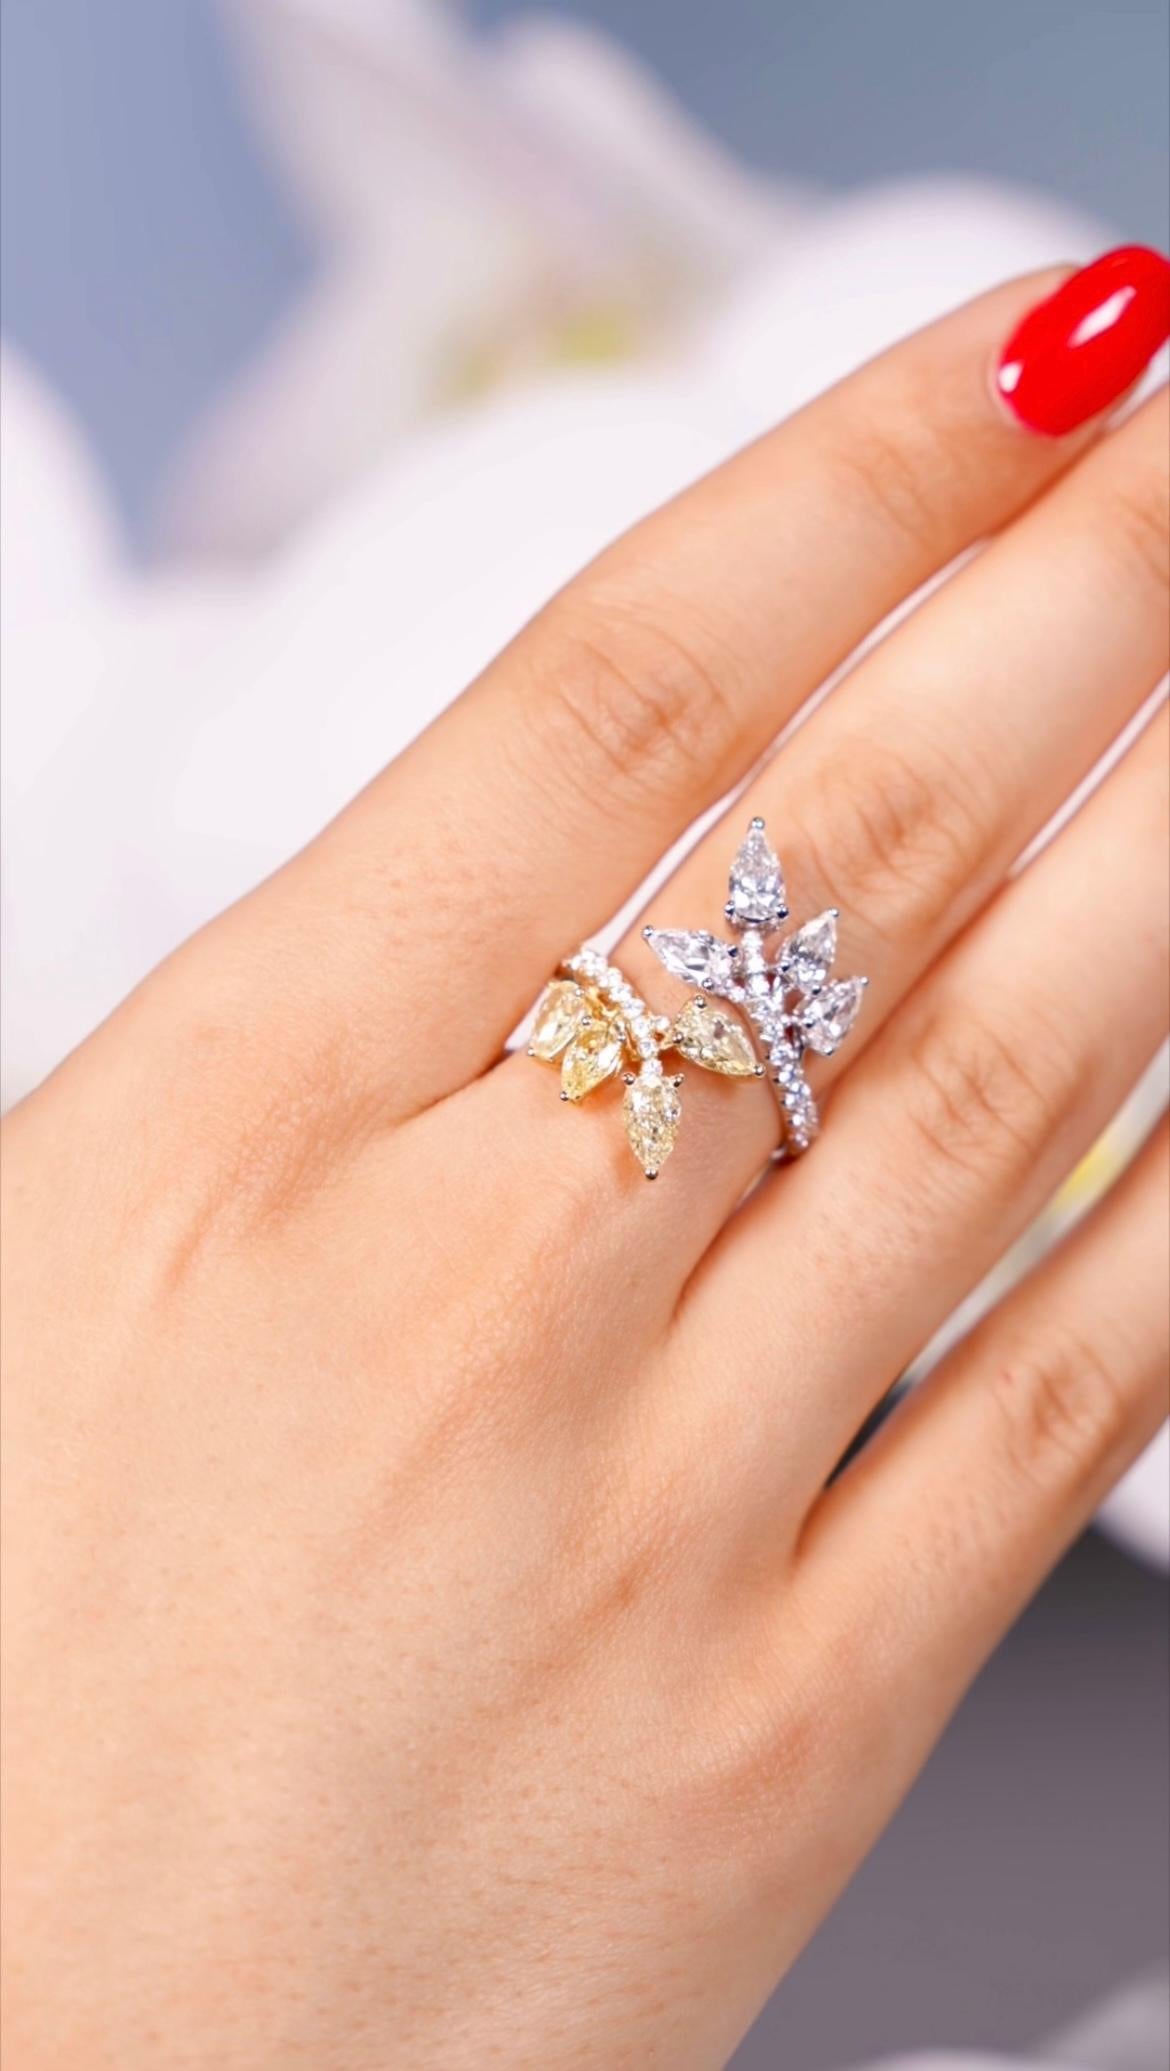 Handmade
18K White & Yellow Gold
2.98ct Total Diamond Weight
Designed, Handpicked, & Manufactured From Scratch In Los Angeles Using Only The Finest Materials and Workmanship